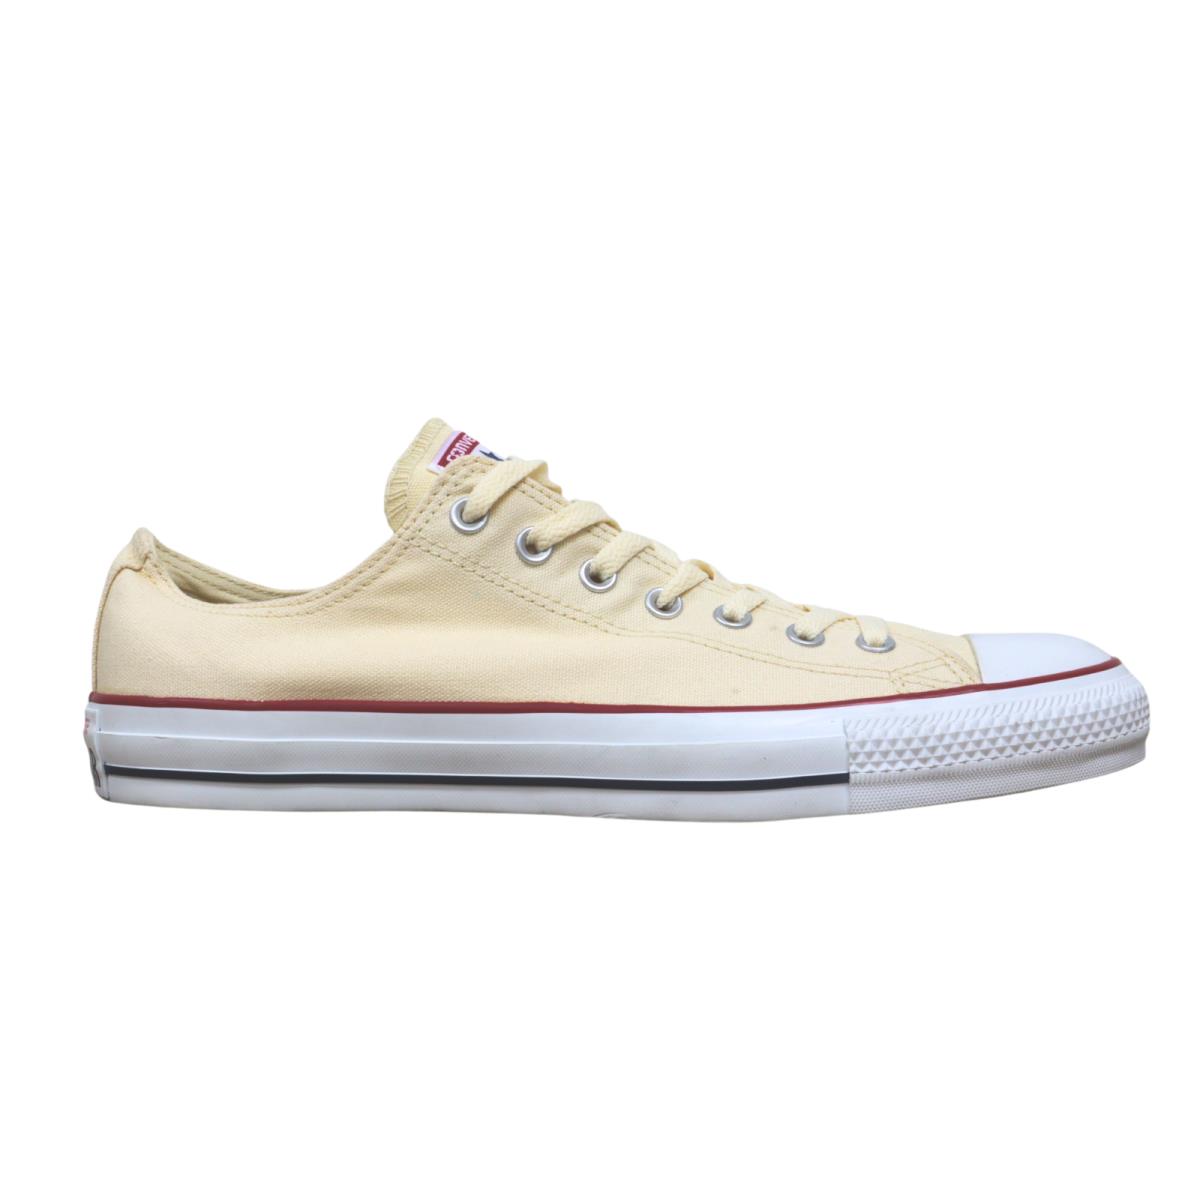 Size 11.5 Converse M9165 Chuck Taylor All Star OX Natural White Shoes - Beige